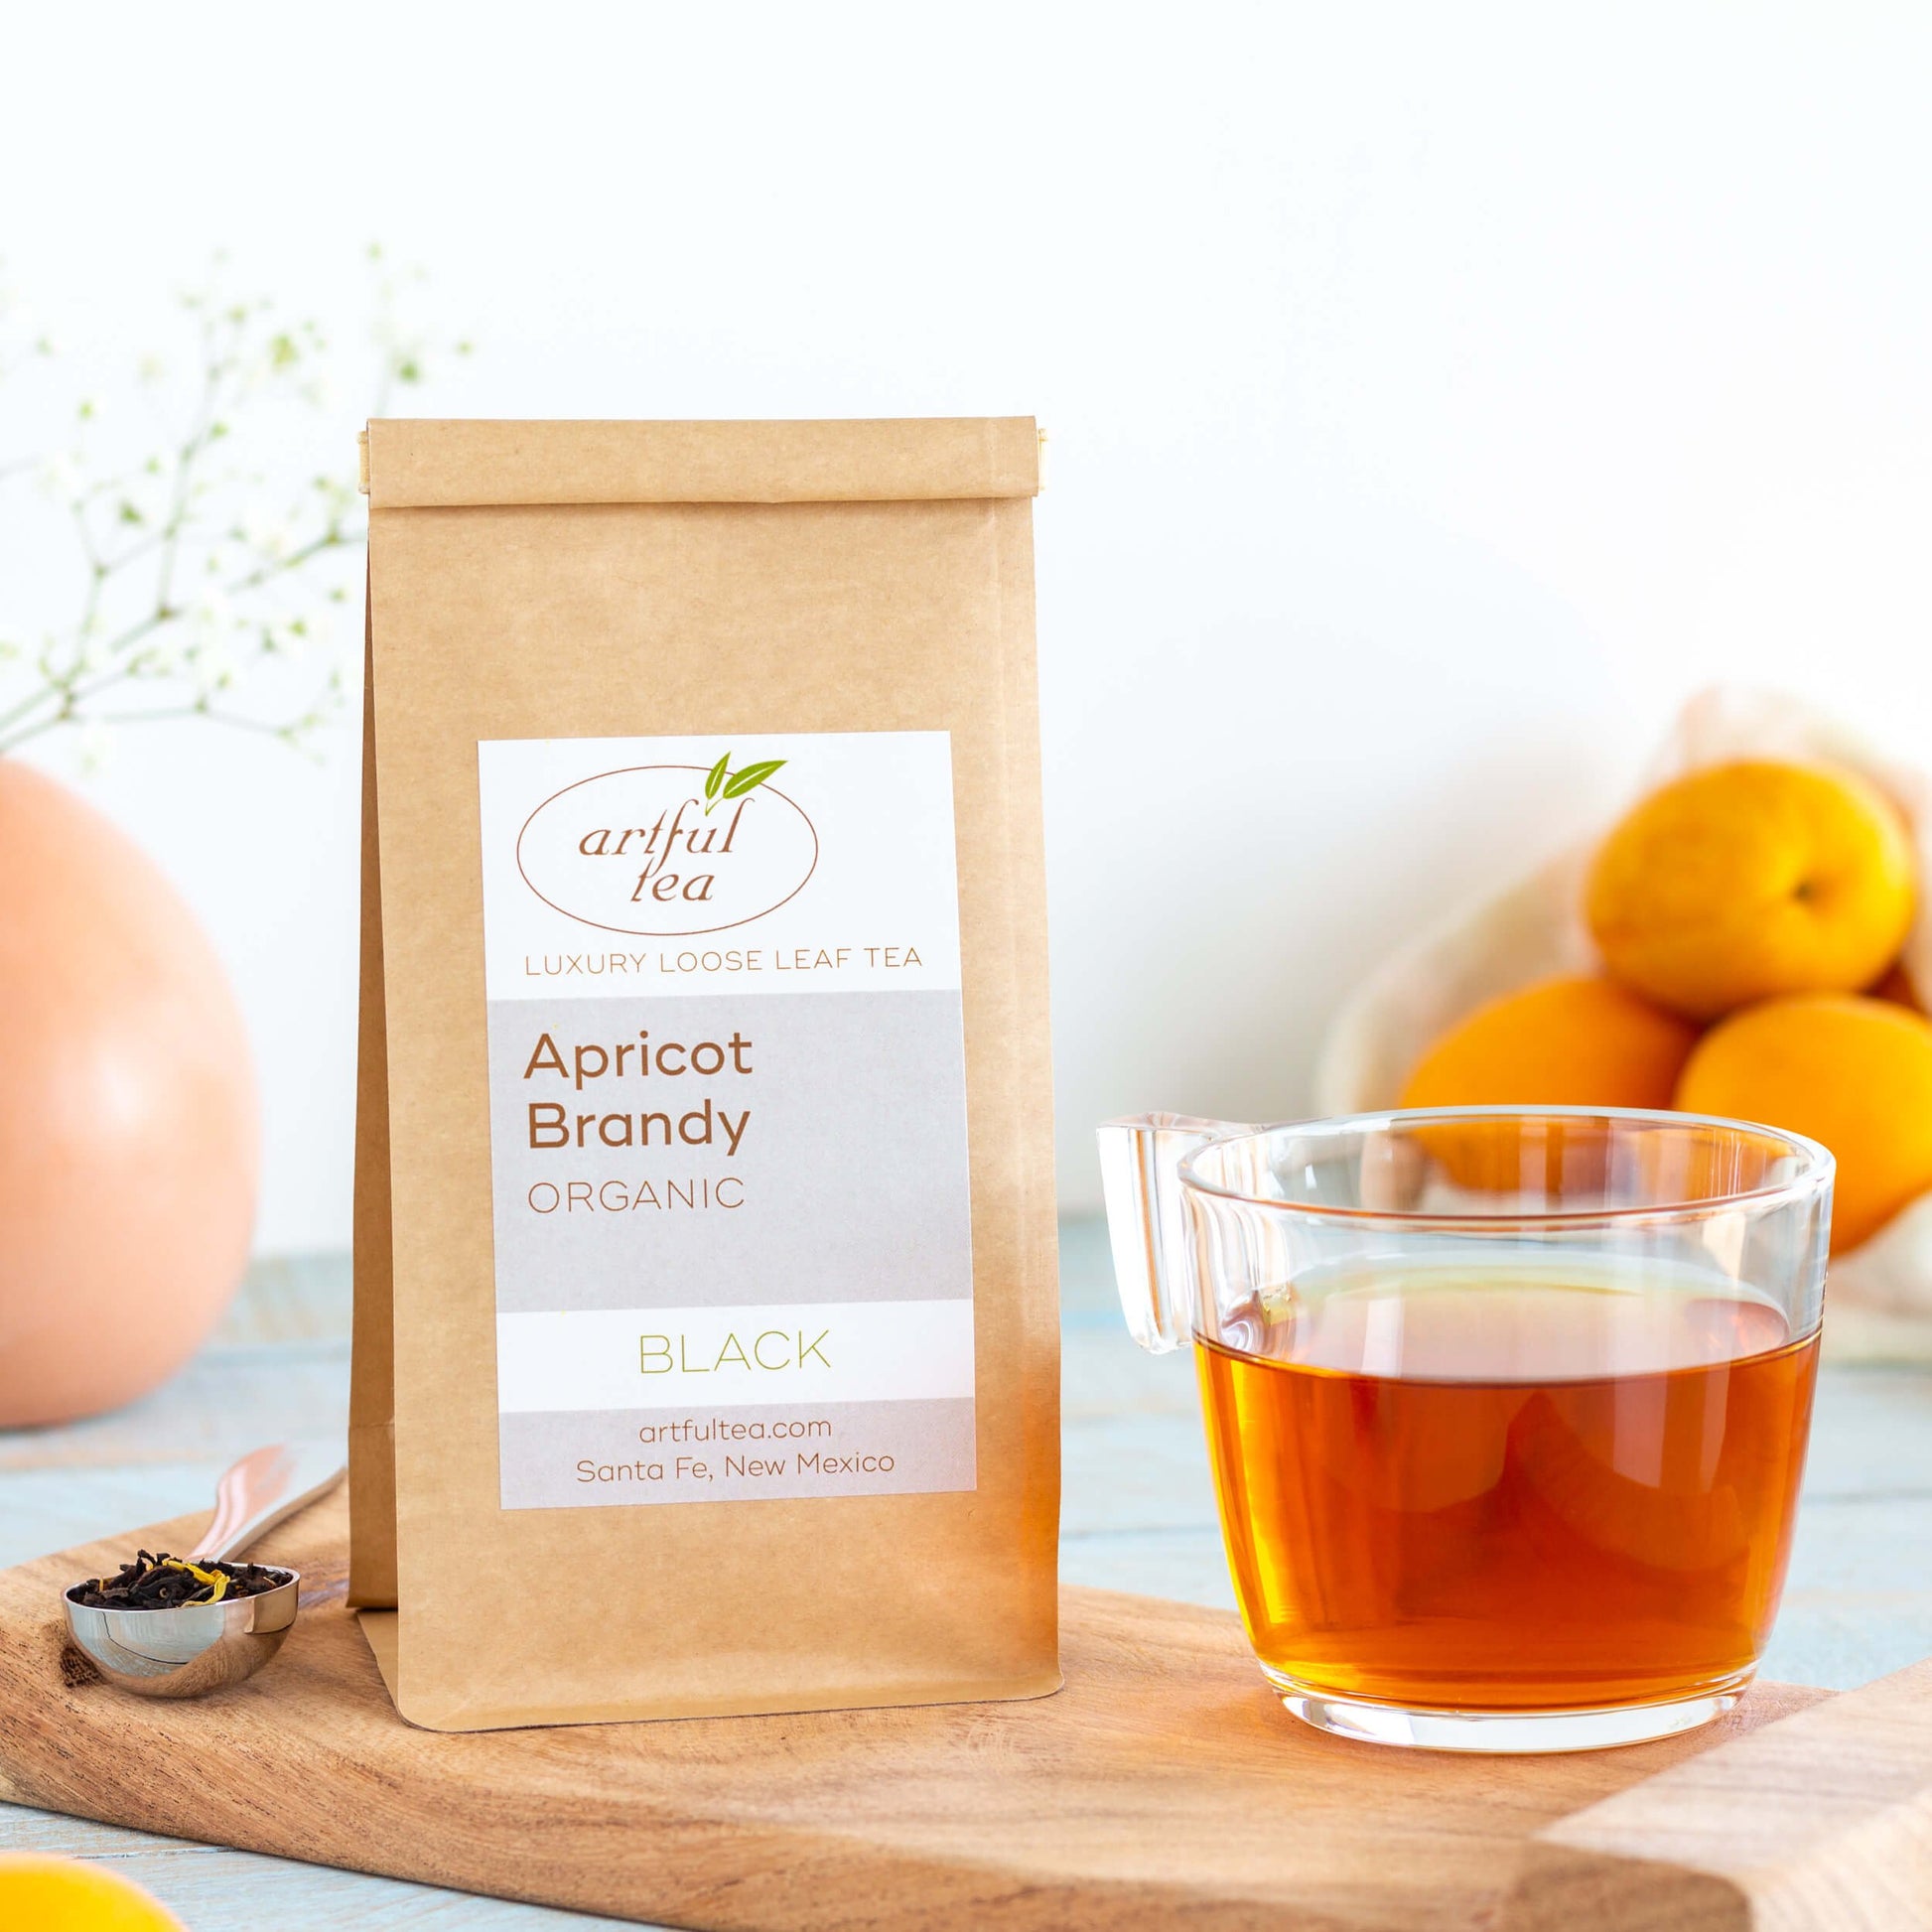 Apricot Brandy Organic Black Tea shown packaged in a kraft bag, displayed on a wooden tray next to a glass mug of brewed tea with a bowl of apricots in the background